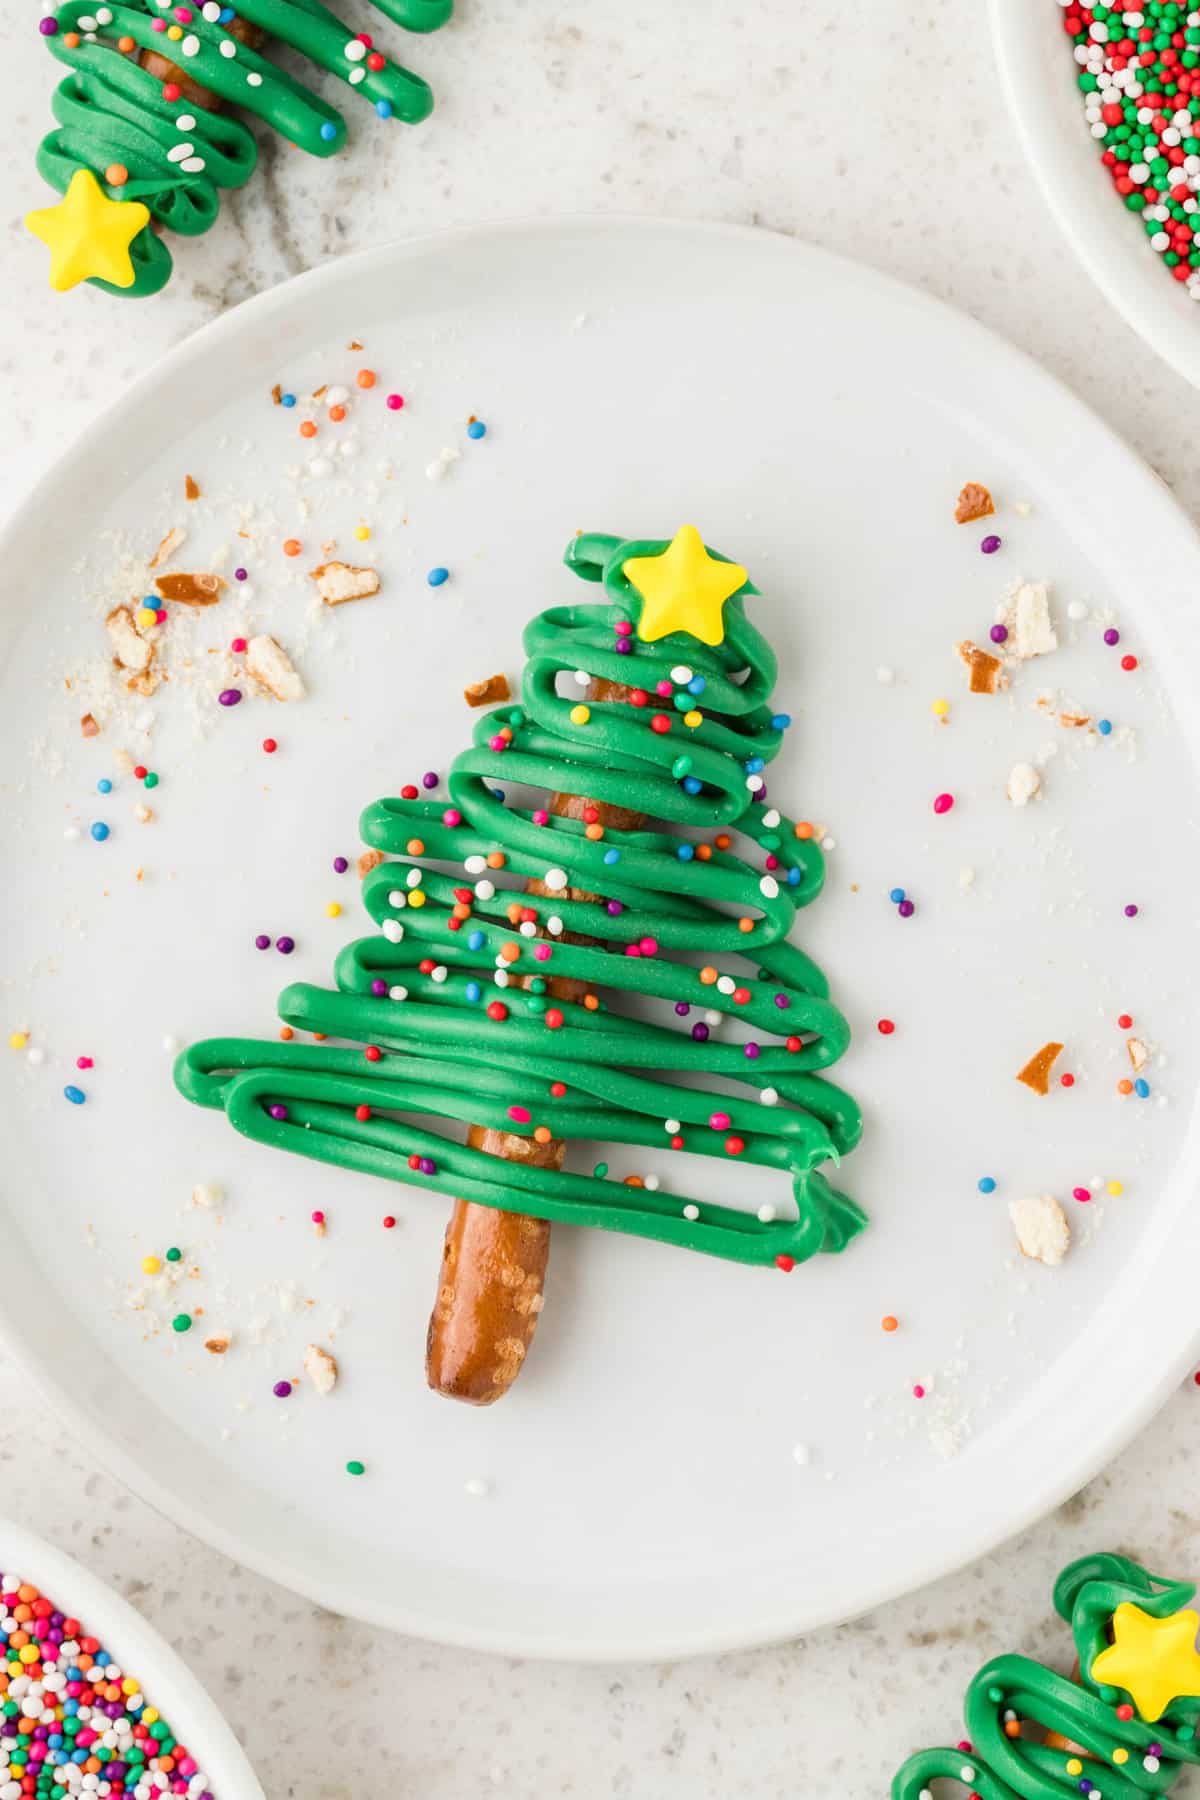 One Christmas Tree Pretzel displayed on a white plate with sprinkles around it.